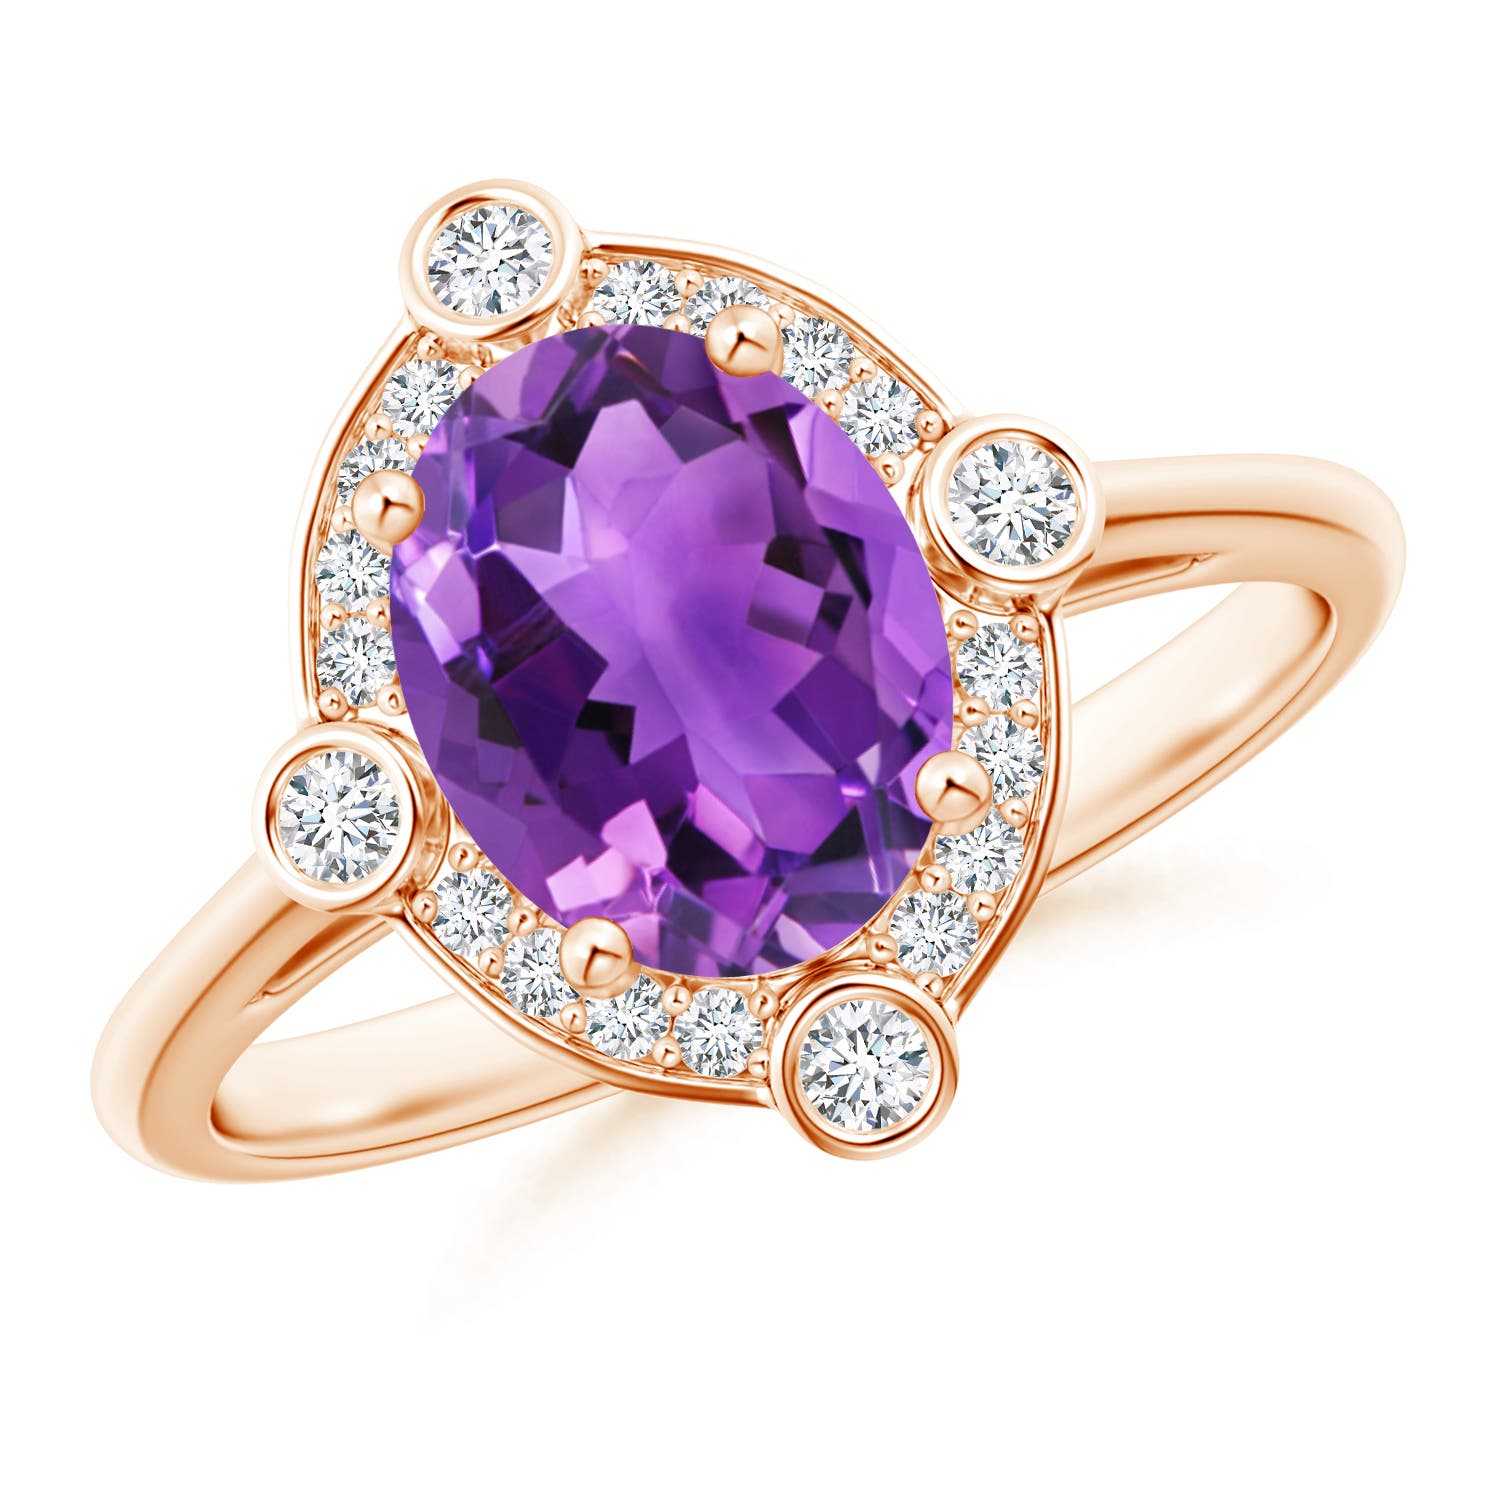 AAA - Amethyst / 1.74 CT / 14 KT Rose Gold